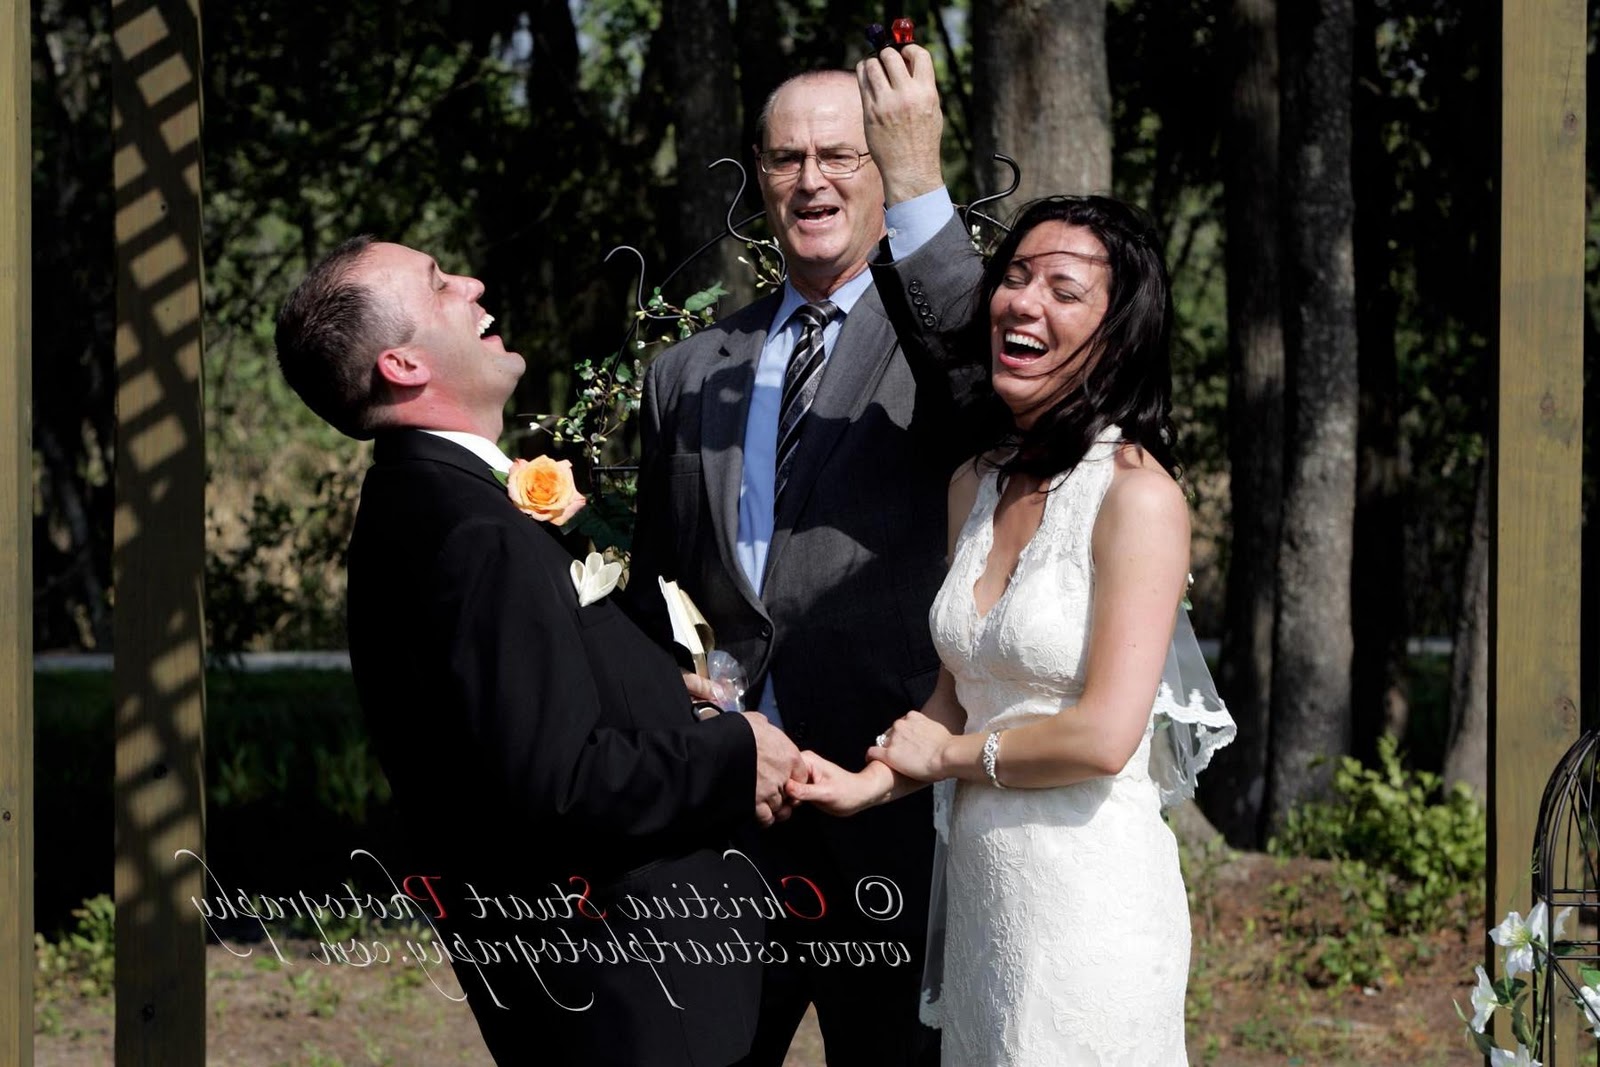 The wedding officiant produces